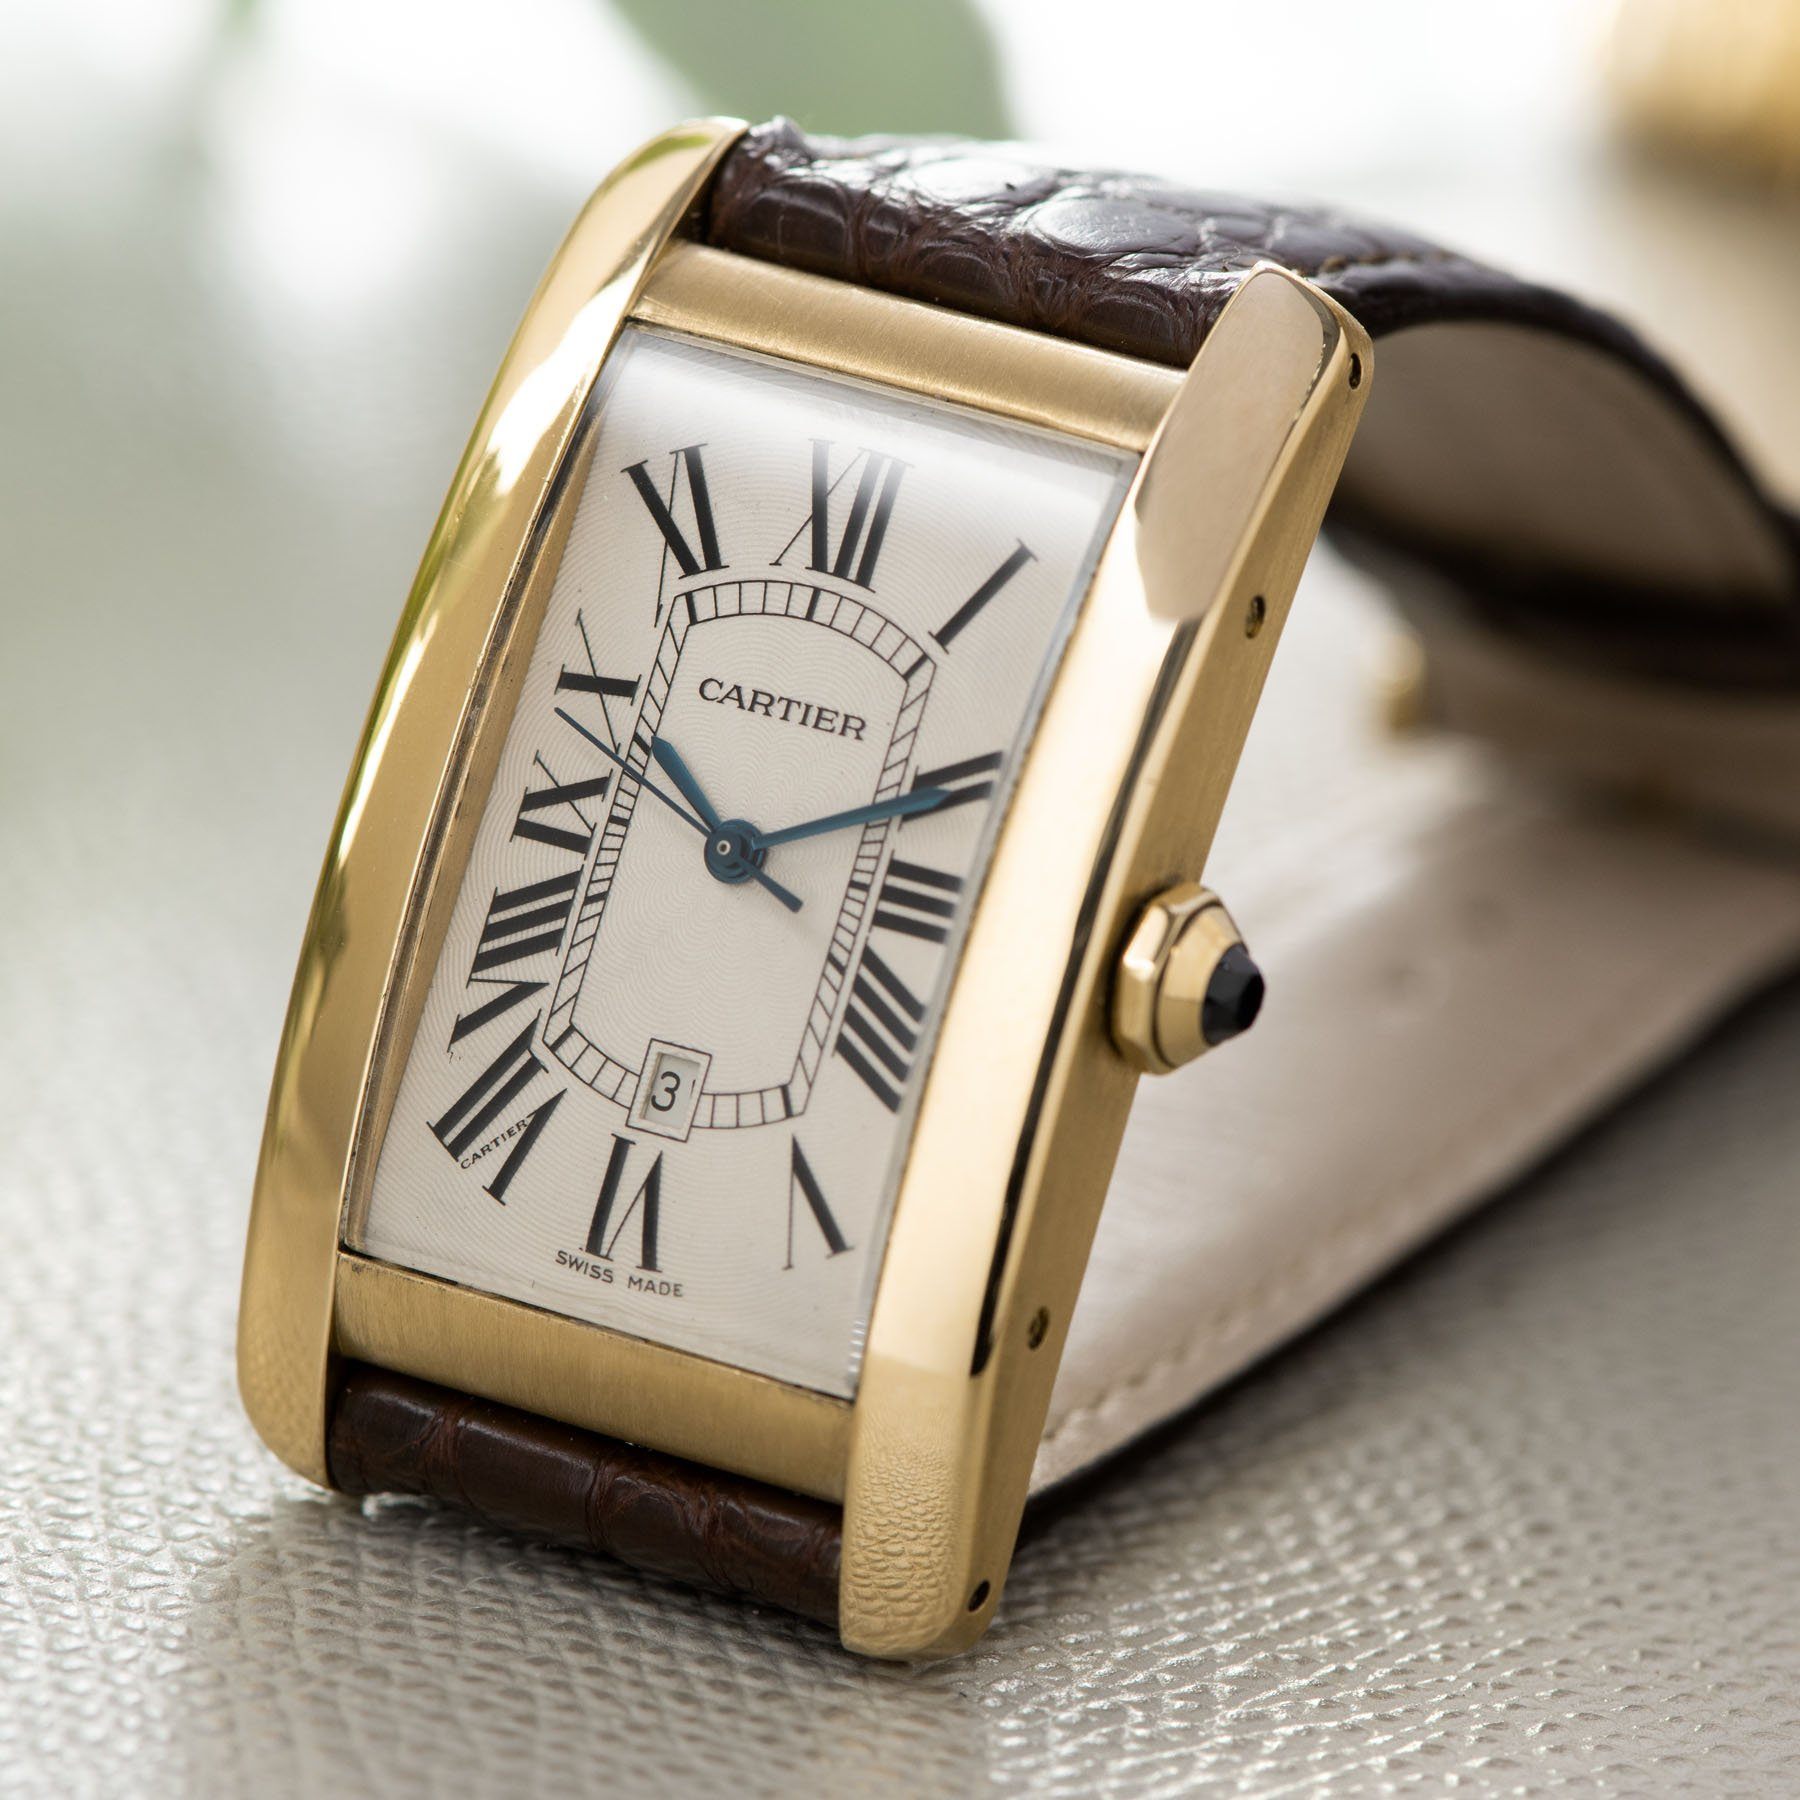 Cartier Tank Americaine Jumbo Yelow Gold ref 1740 with Eggshell dial 